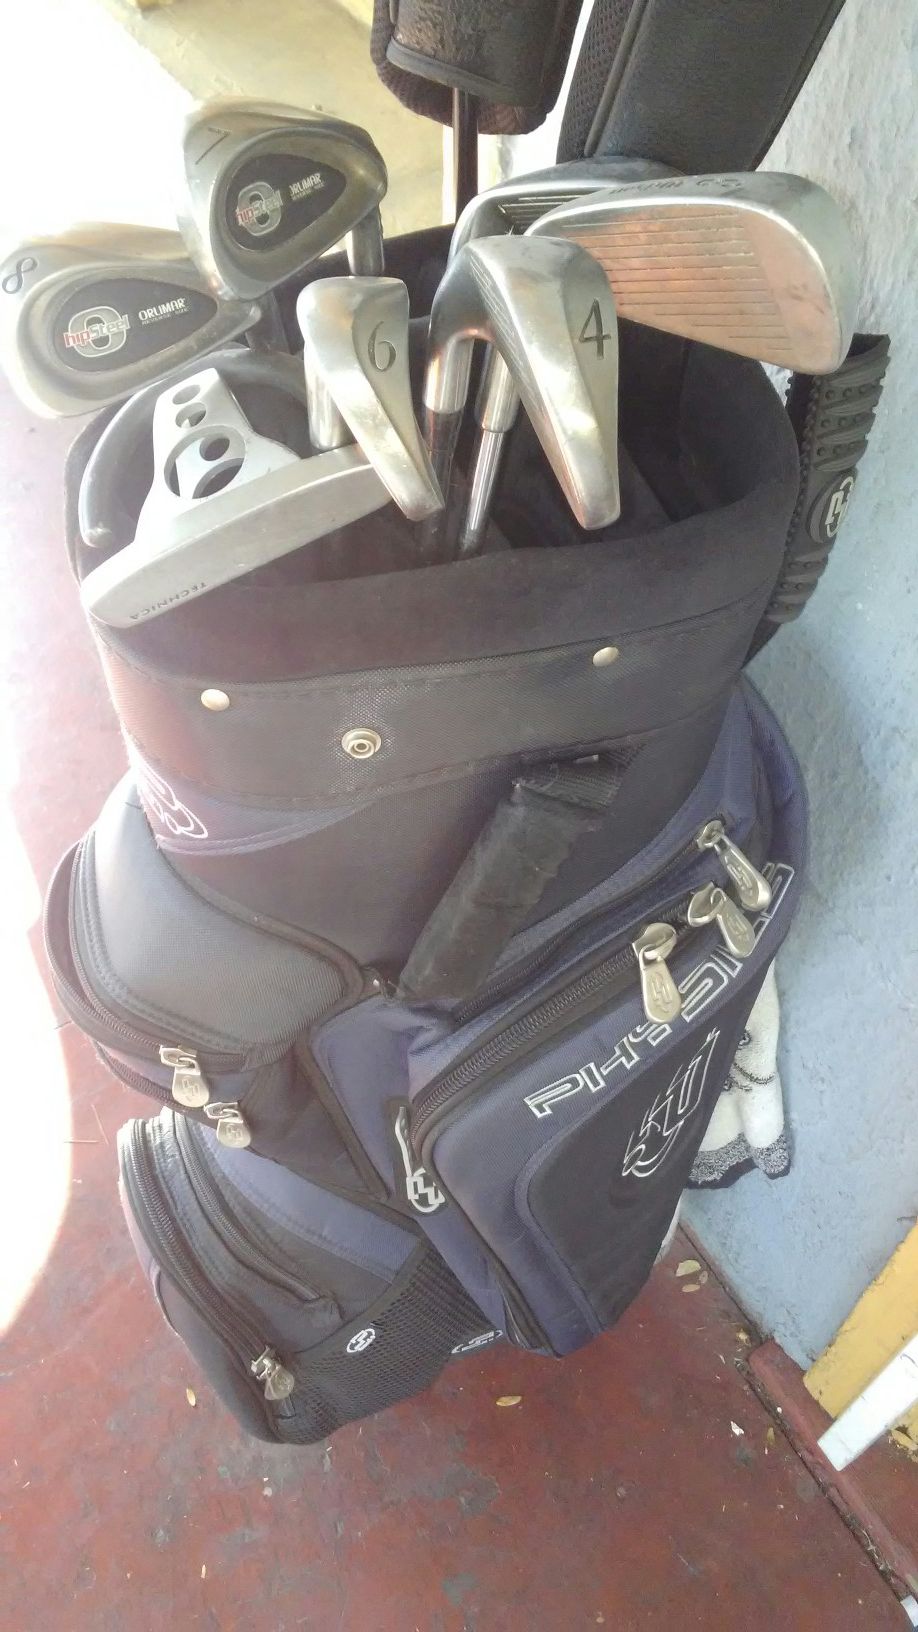 Set of golf clubs and bag $20